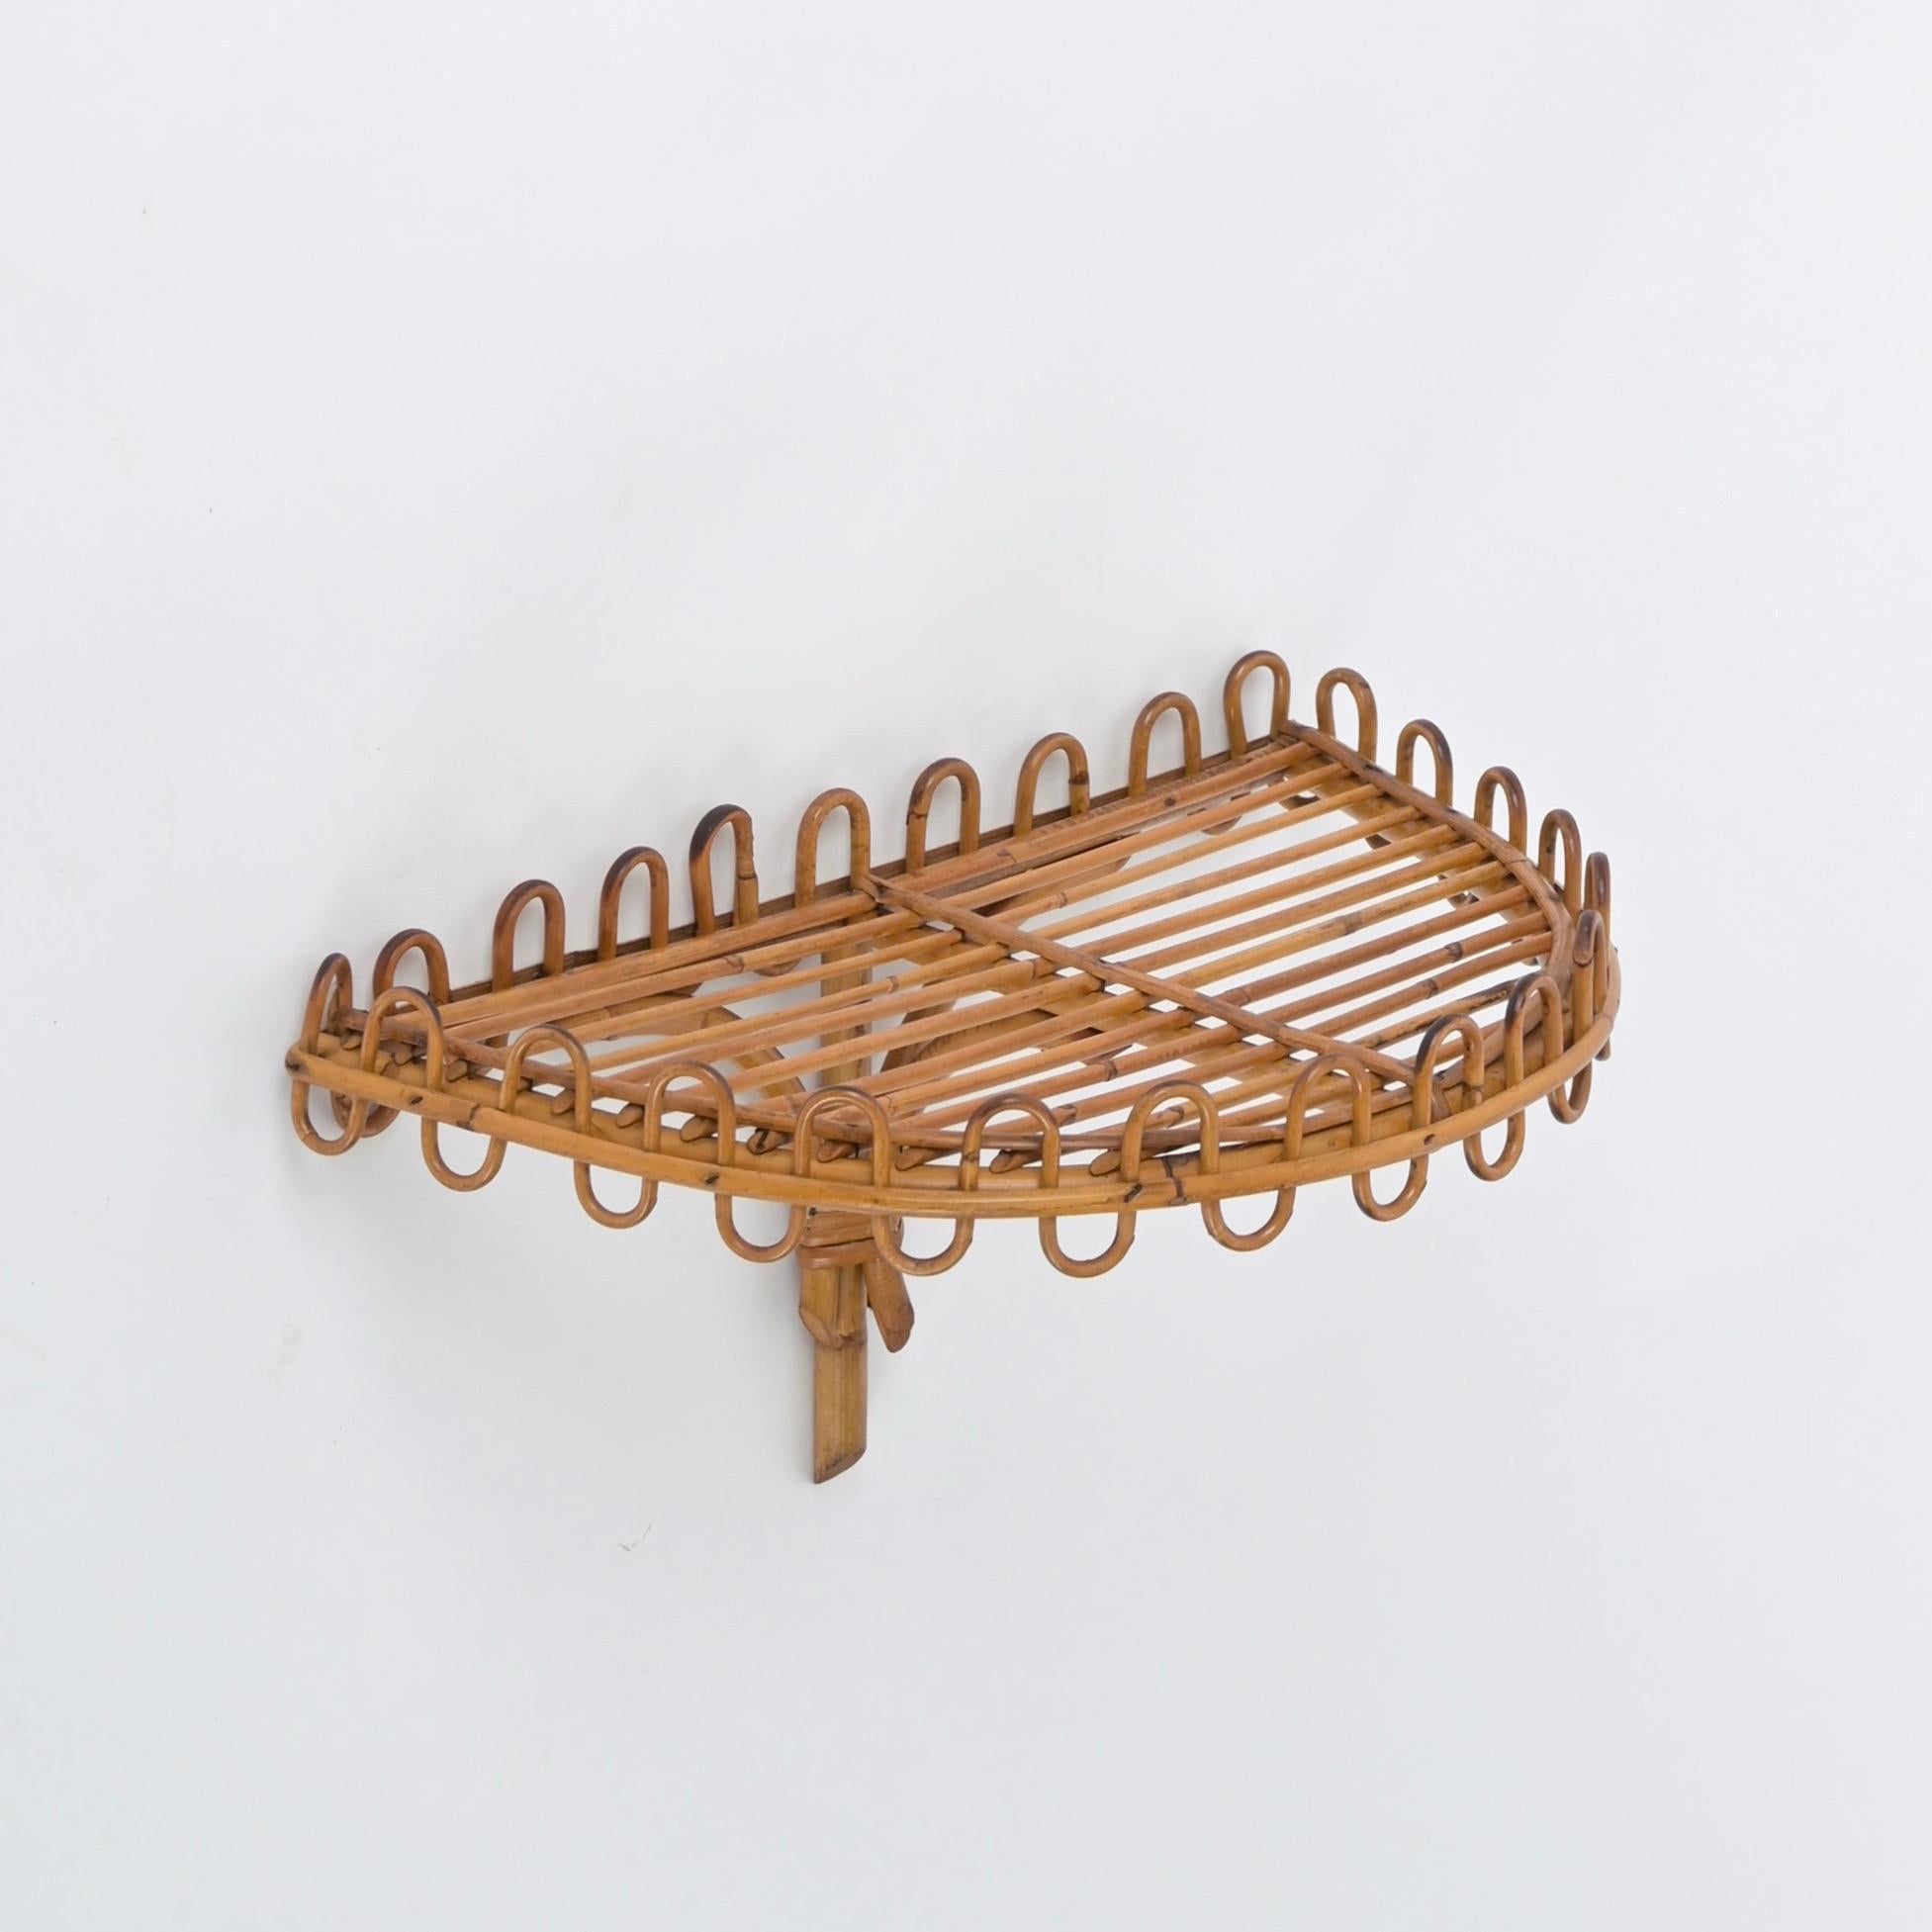 Hand-Woven Midcentury Rattan and Bamboo Wall Shelf, Franco Albini, Italy, 1960s For Sale